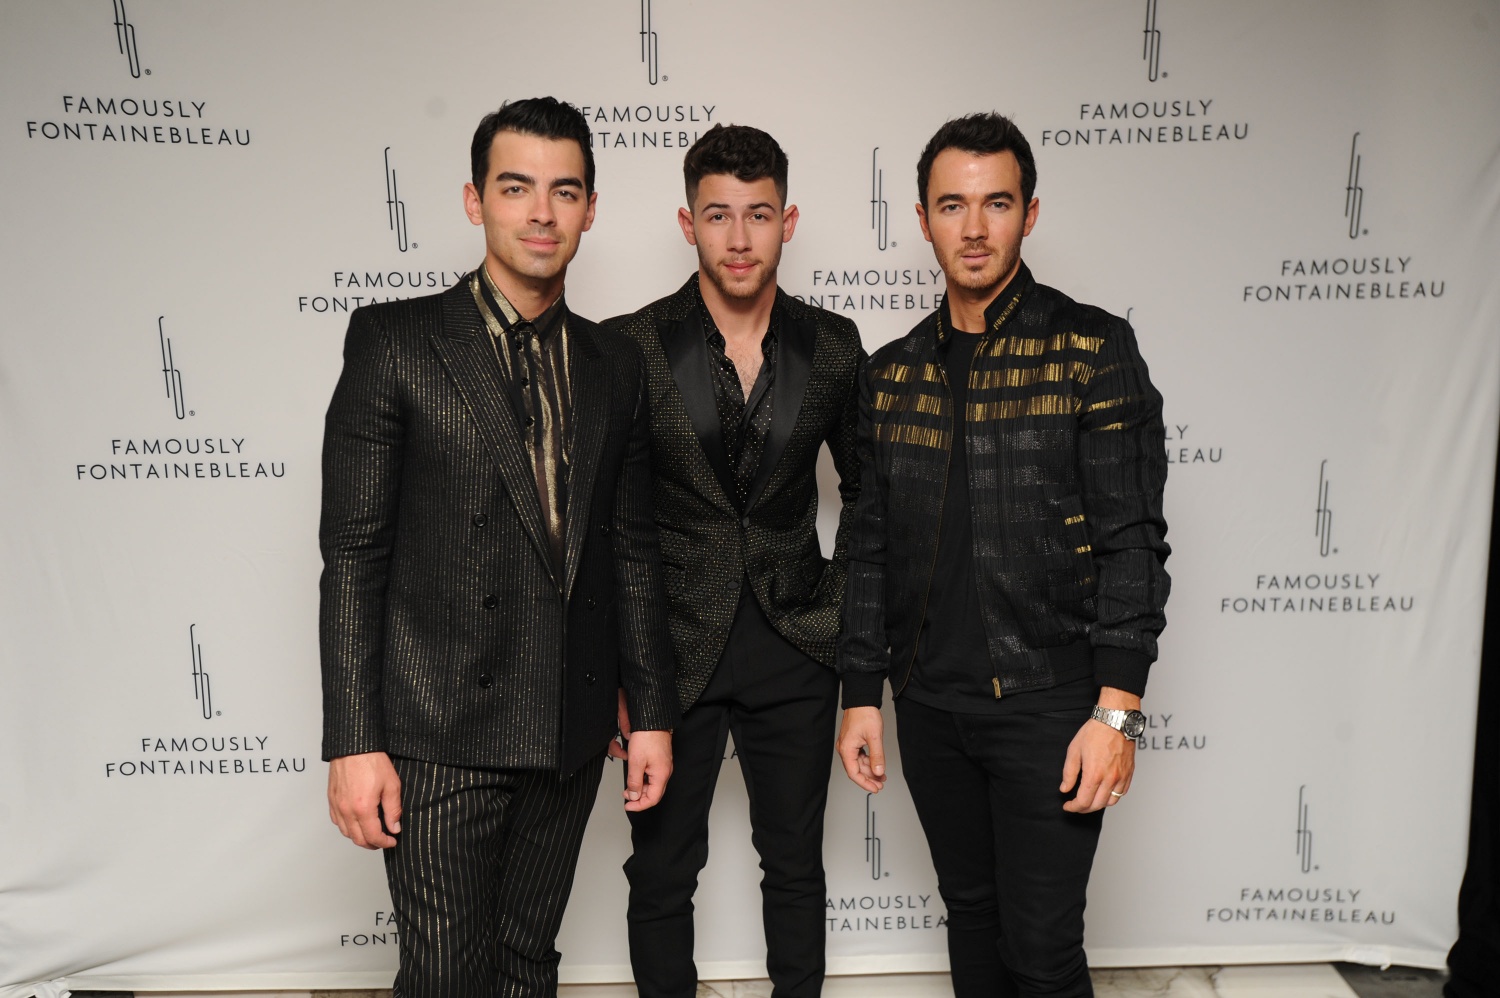 Jonas Brothers Rang in 2020 at The Iconic Fontainebleau Miami Beach